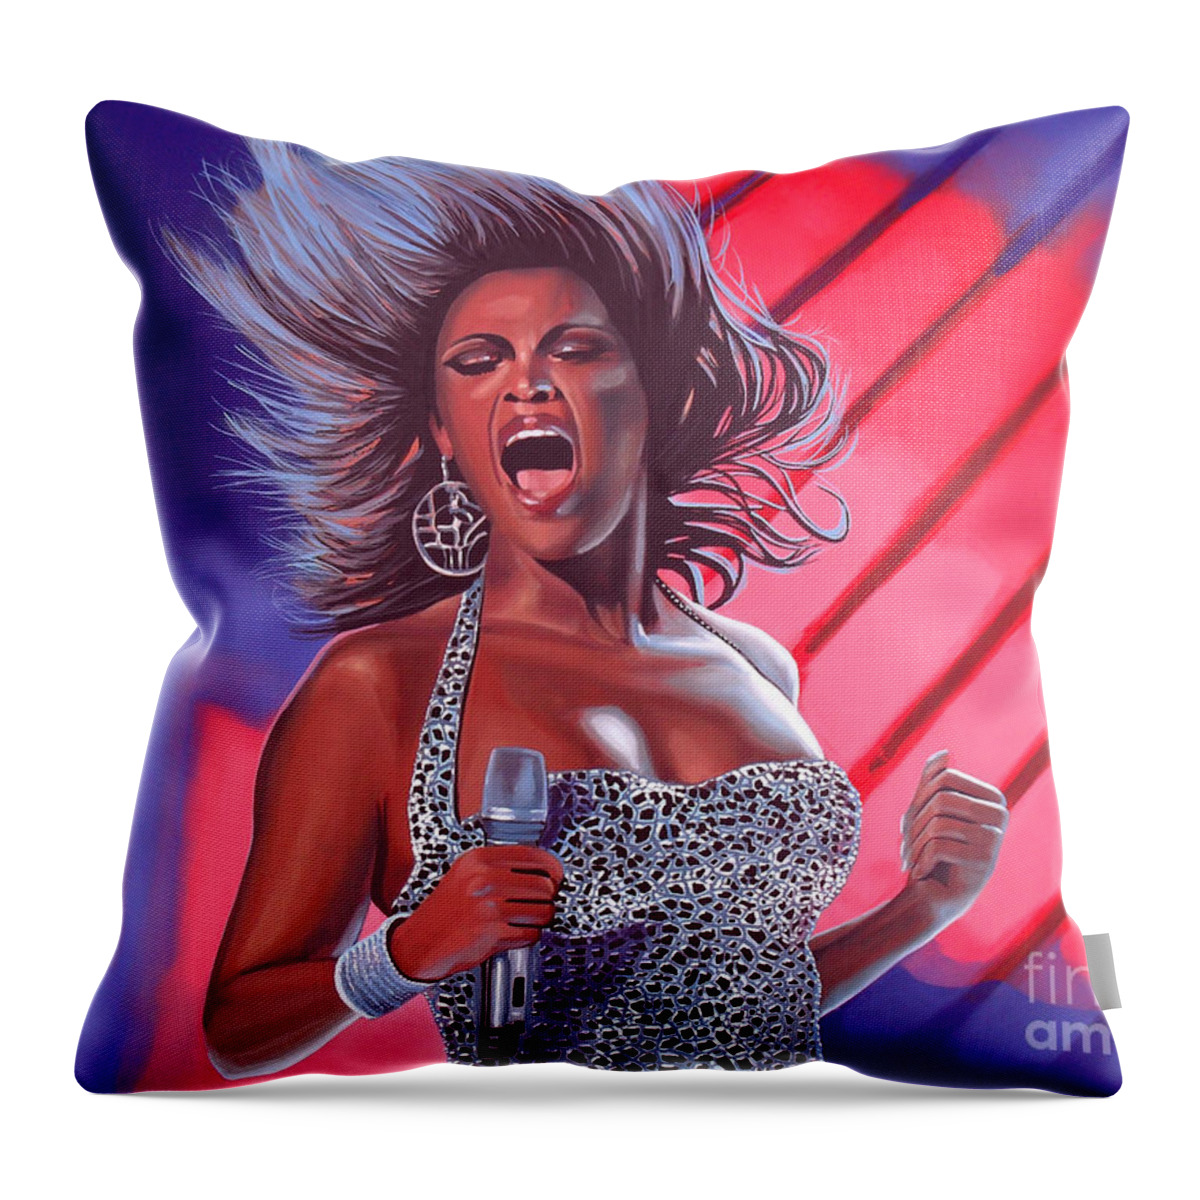 Beyonce Throw Pillow featuring the painting Beyonce by Paul Meijering